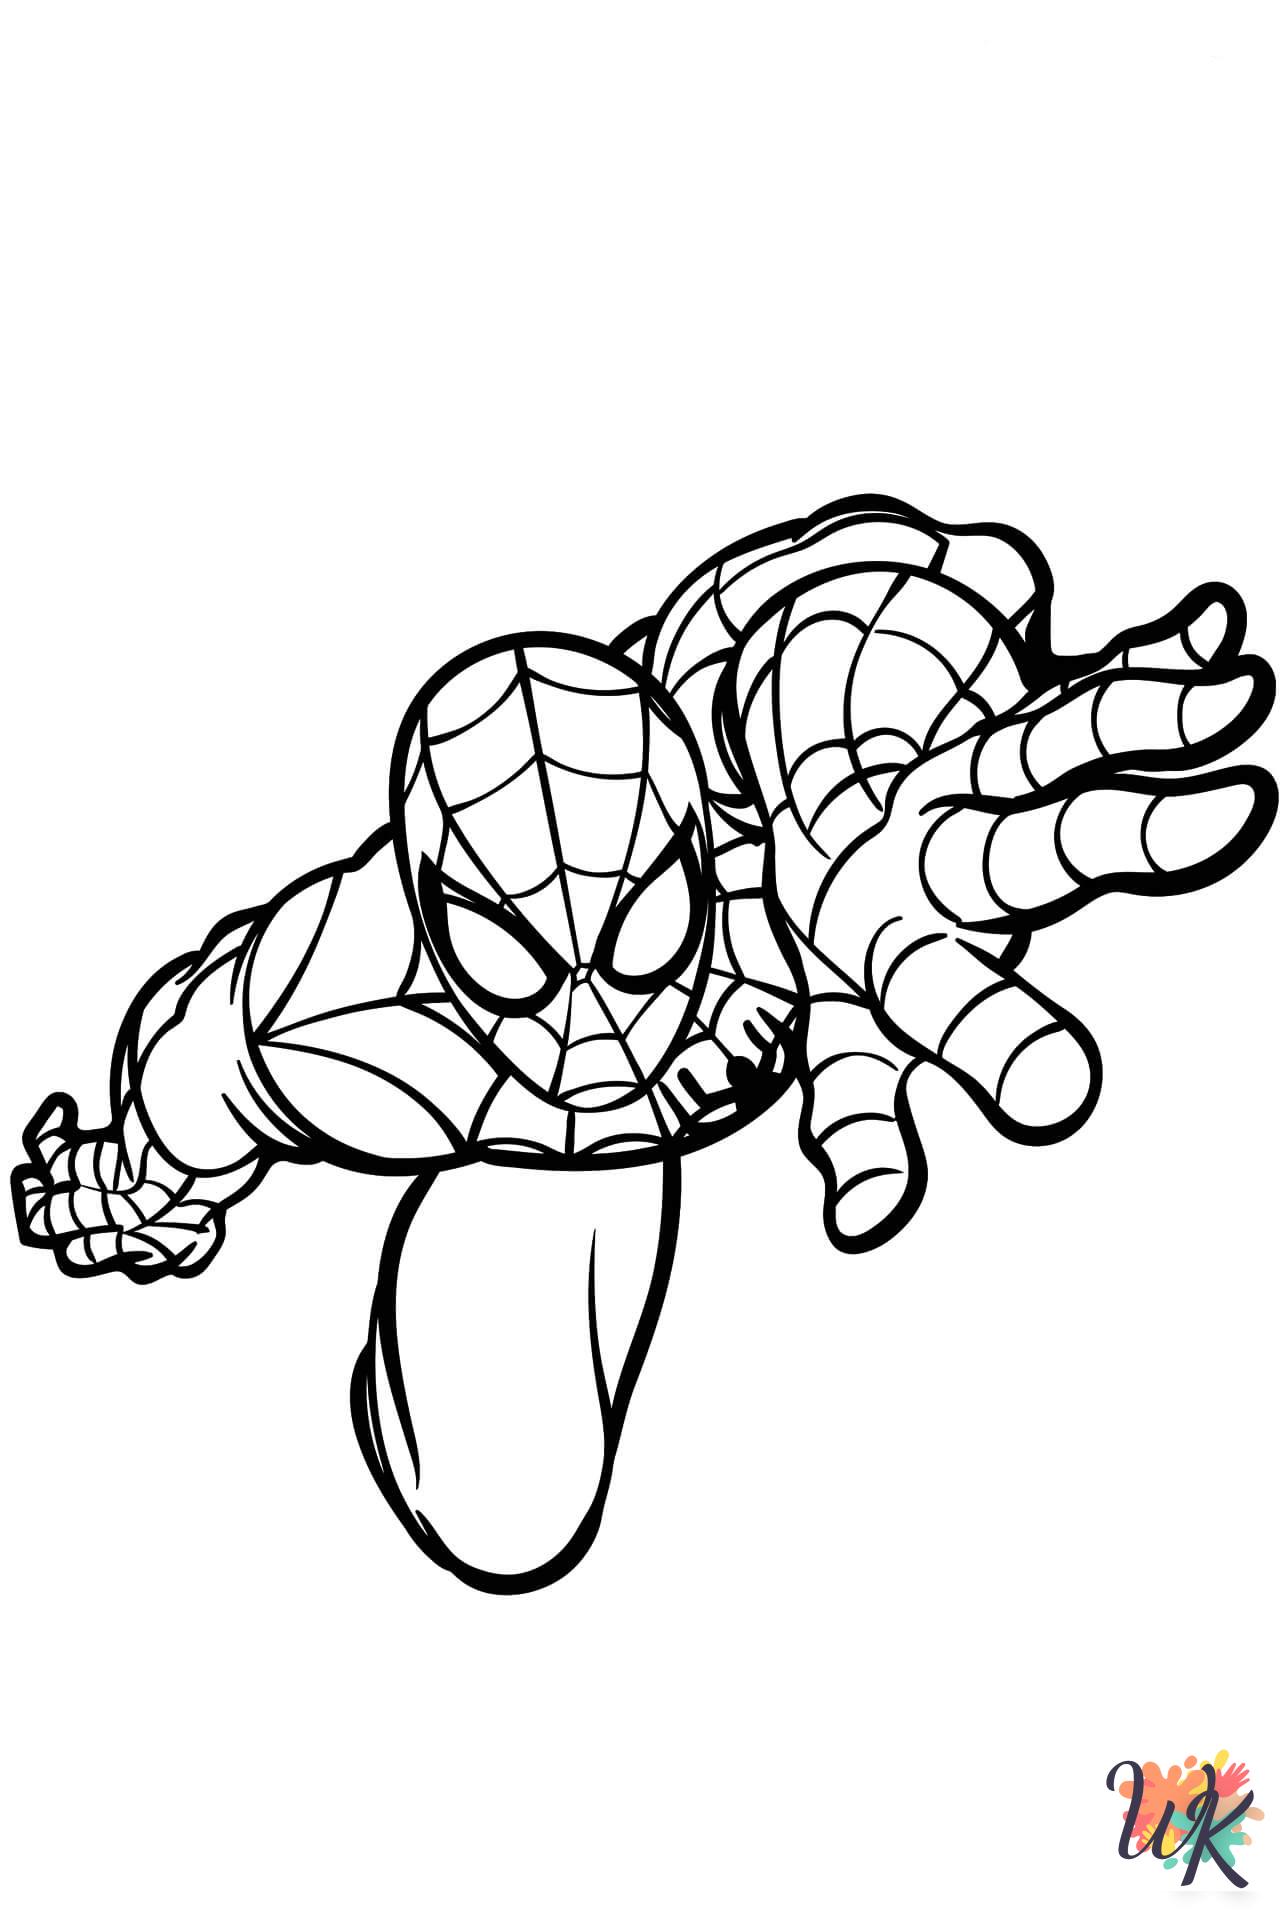 printable Superhero coloring pages